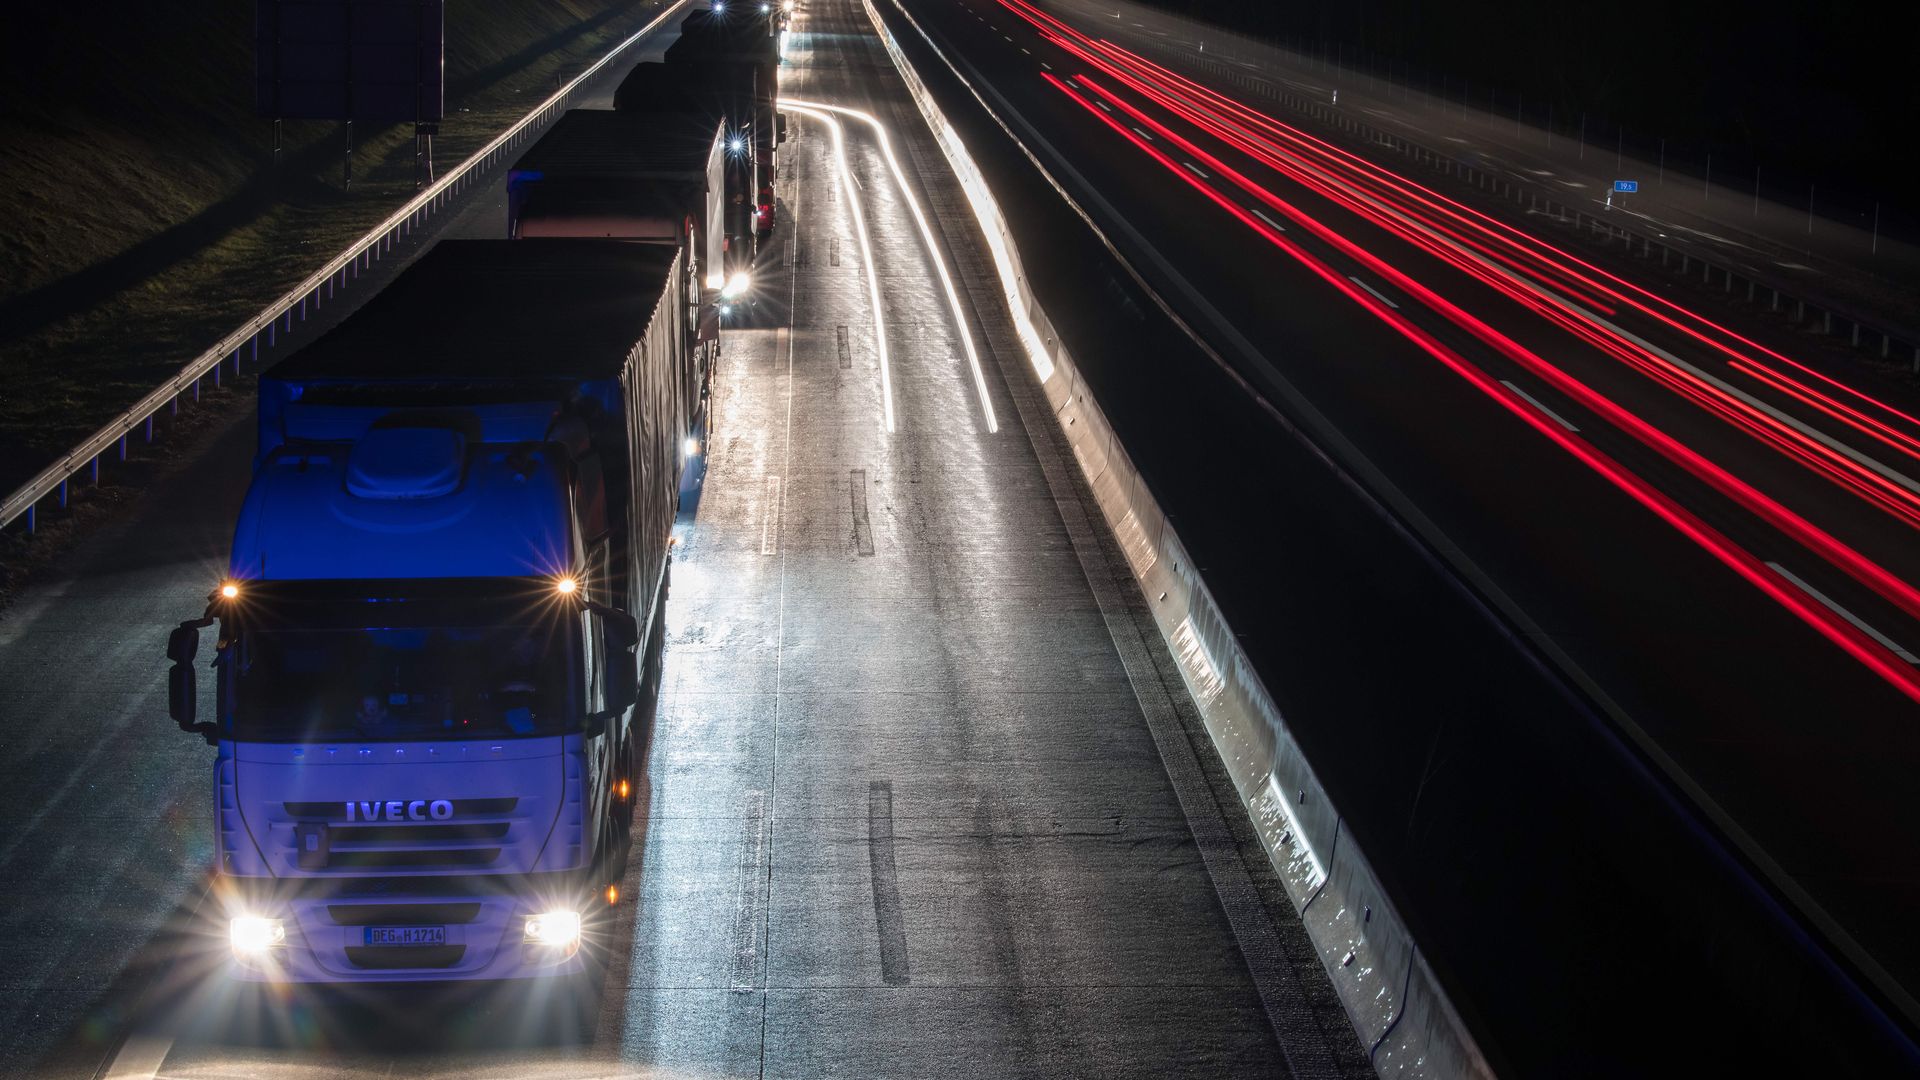 Trucks in a line in traffic at night